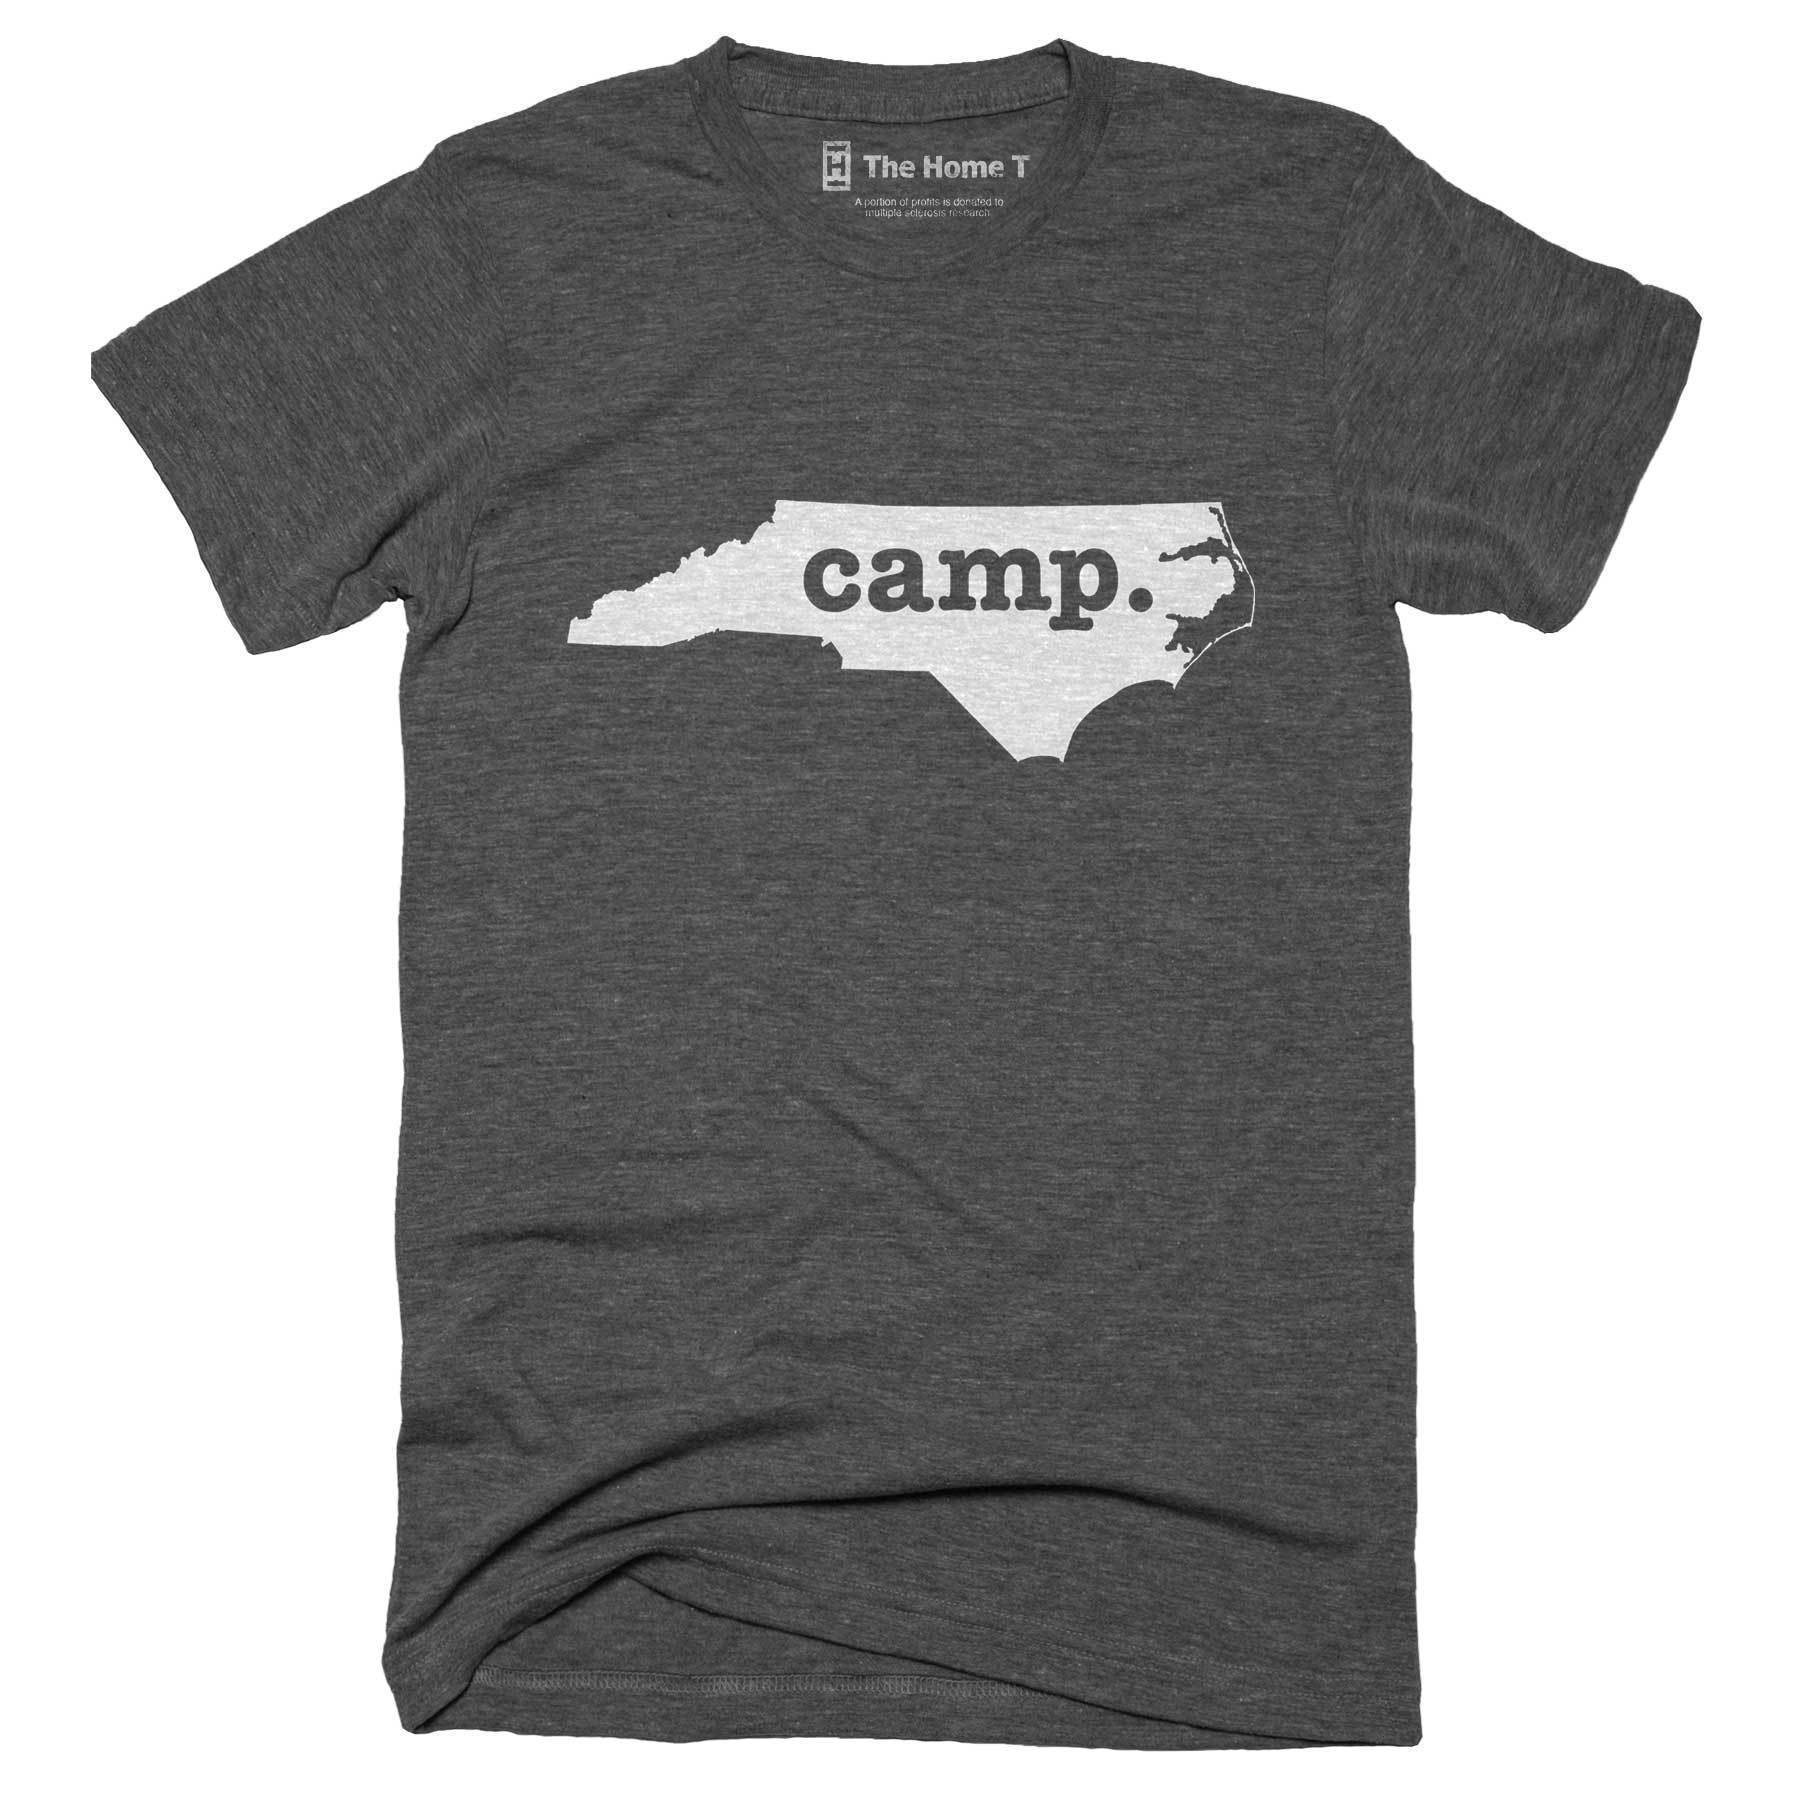 North Carolina Camp Home T-Shirt Outdoor Collection The Home T XS Grey